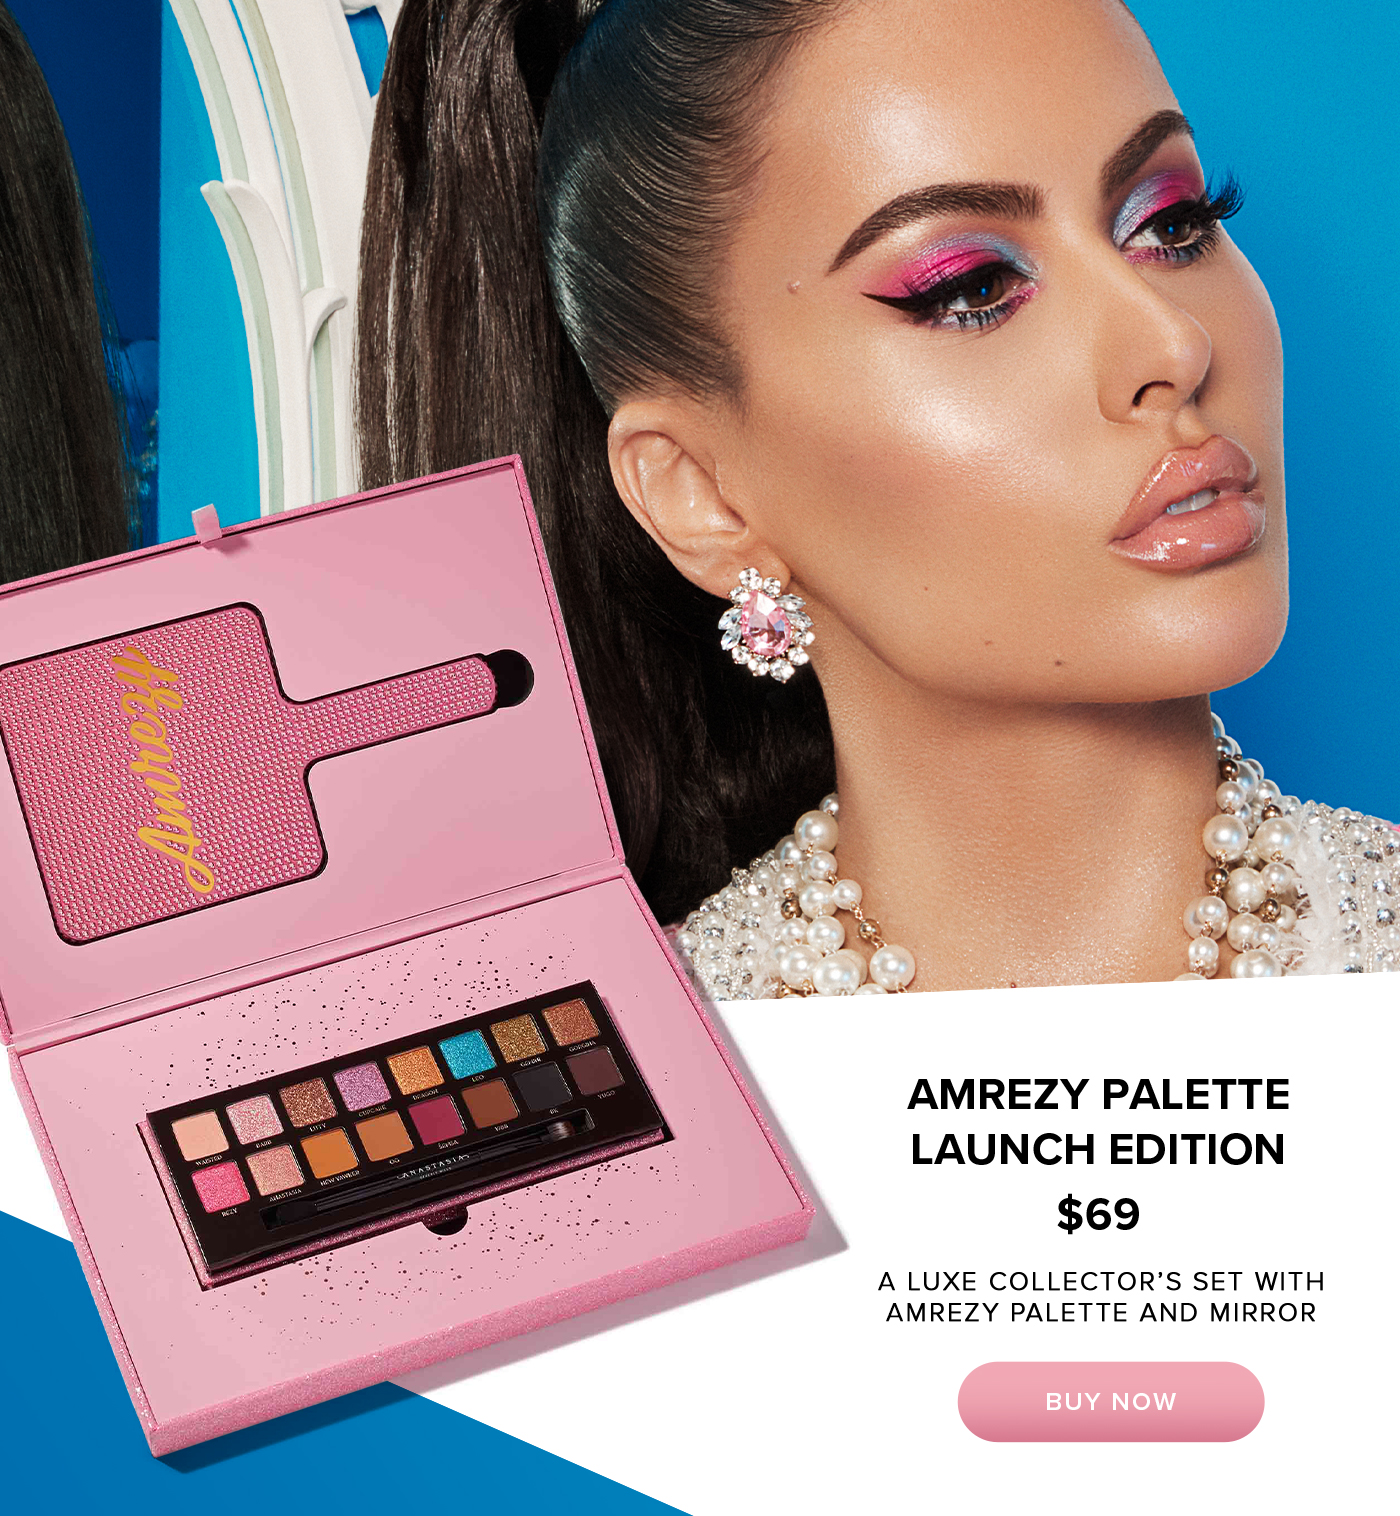 AMREZY PALETTE LAUNCH EDITION $69 A LUXE COLLECTOR'S SET WITH AMREZY PALETTE AND MIRROR BUY NOW